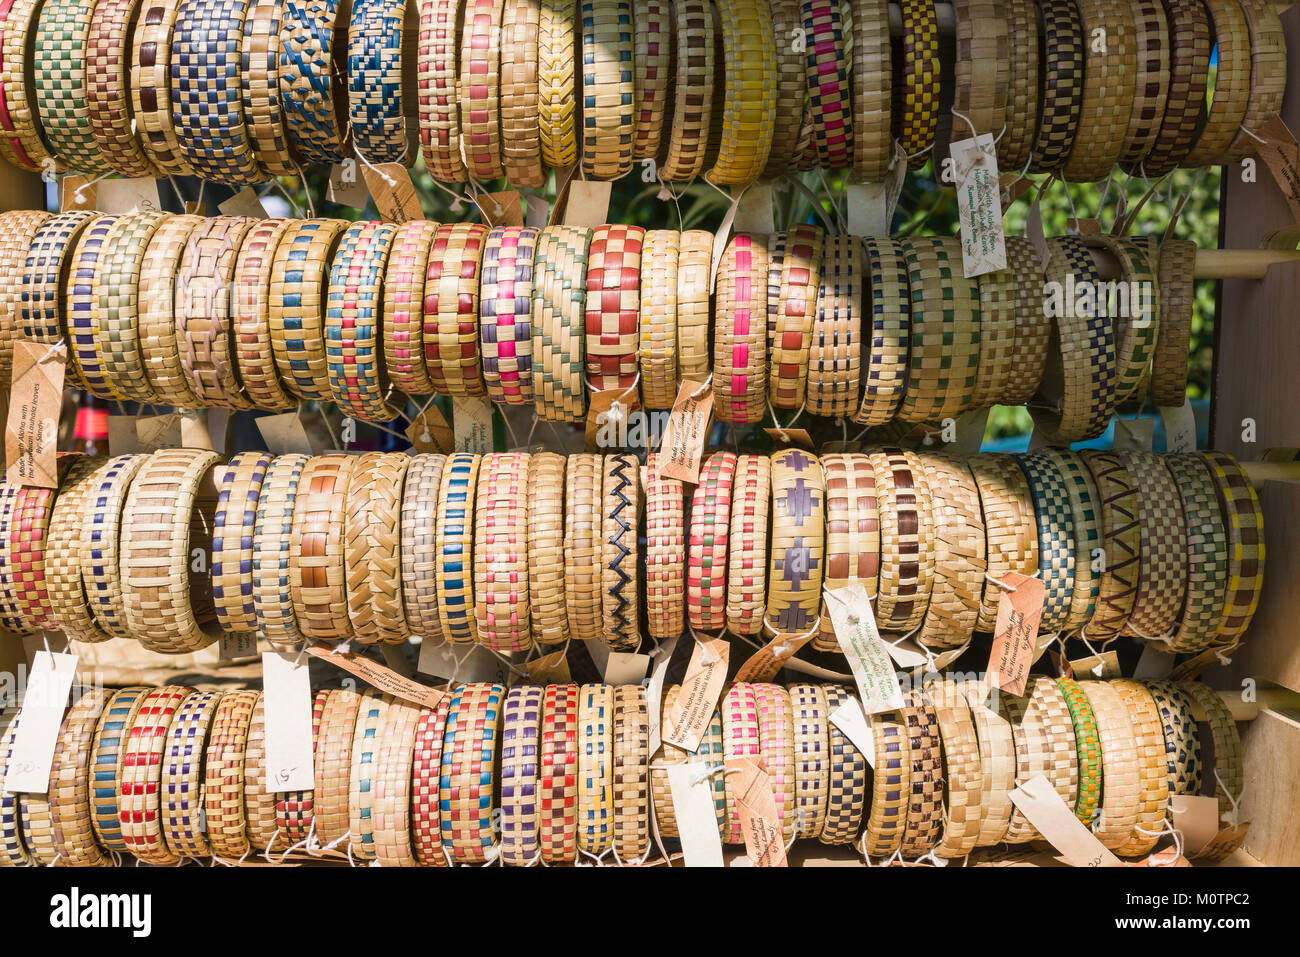 Handmade lauhala bracelets for sale at craft fair in Hawaii. Stock Photo